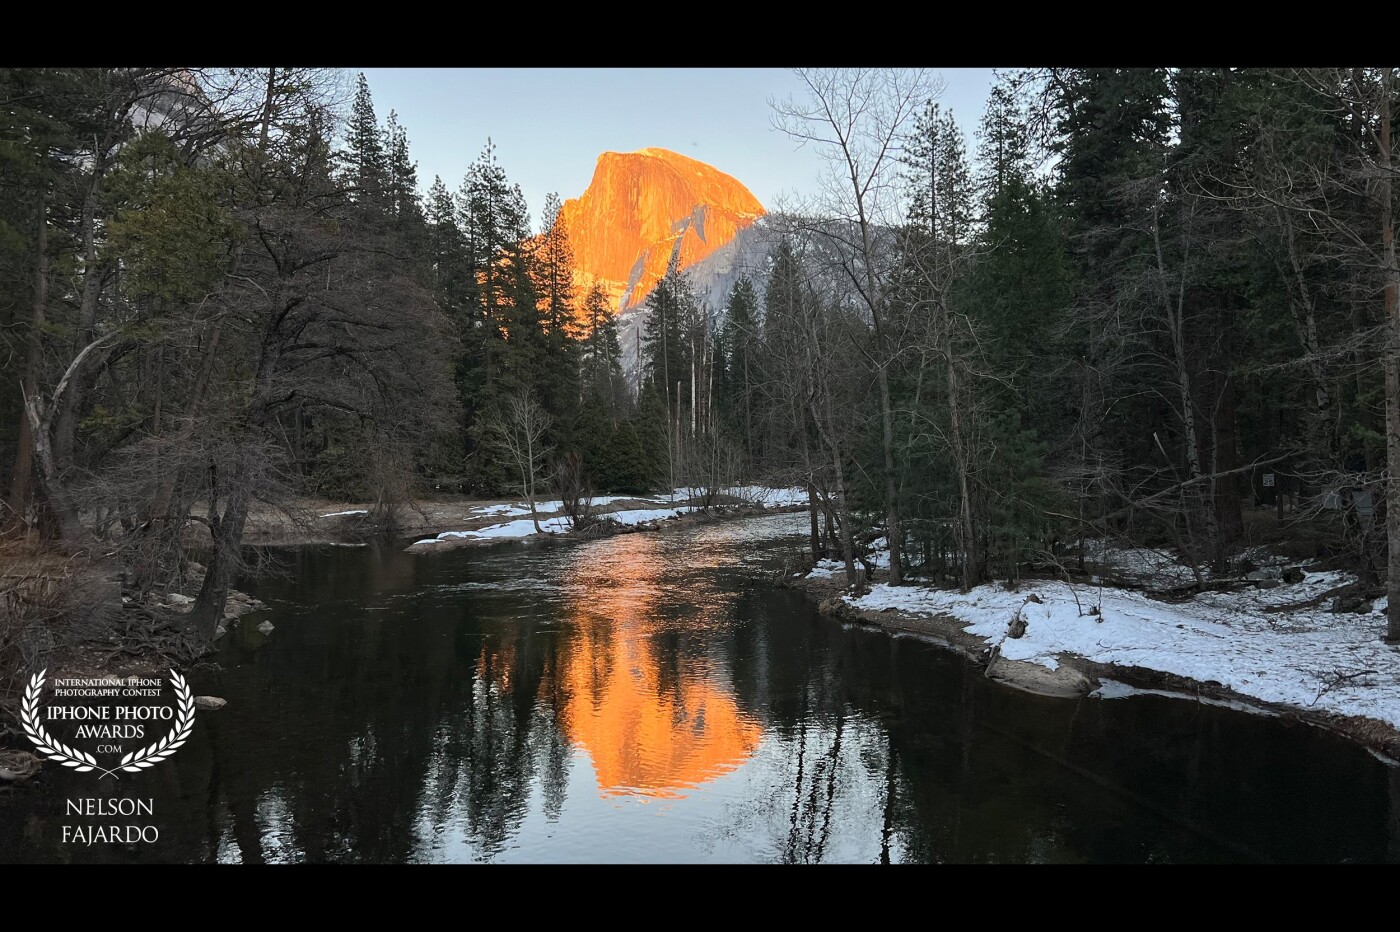 A beautifully reflected half dome on the Merced River as the sun sets from the Yosemite National park captured here with no edits required shot.